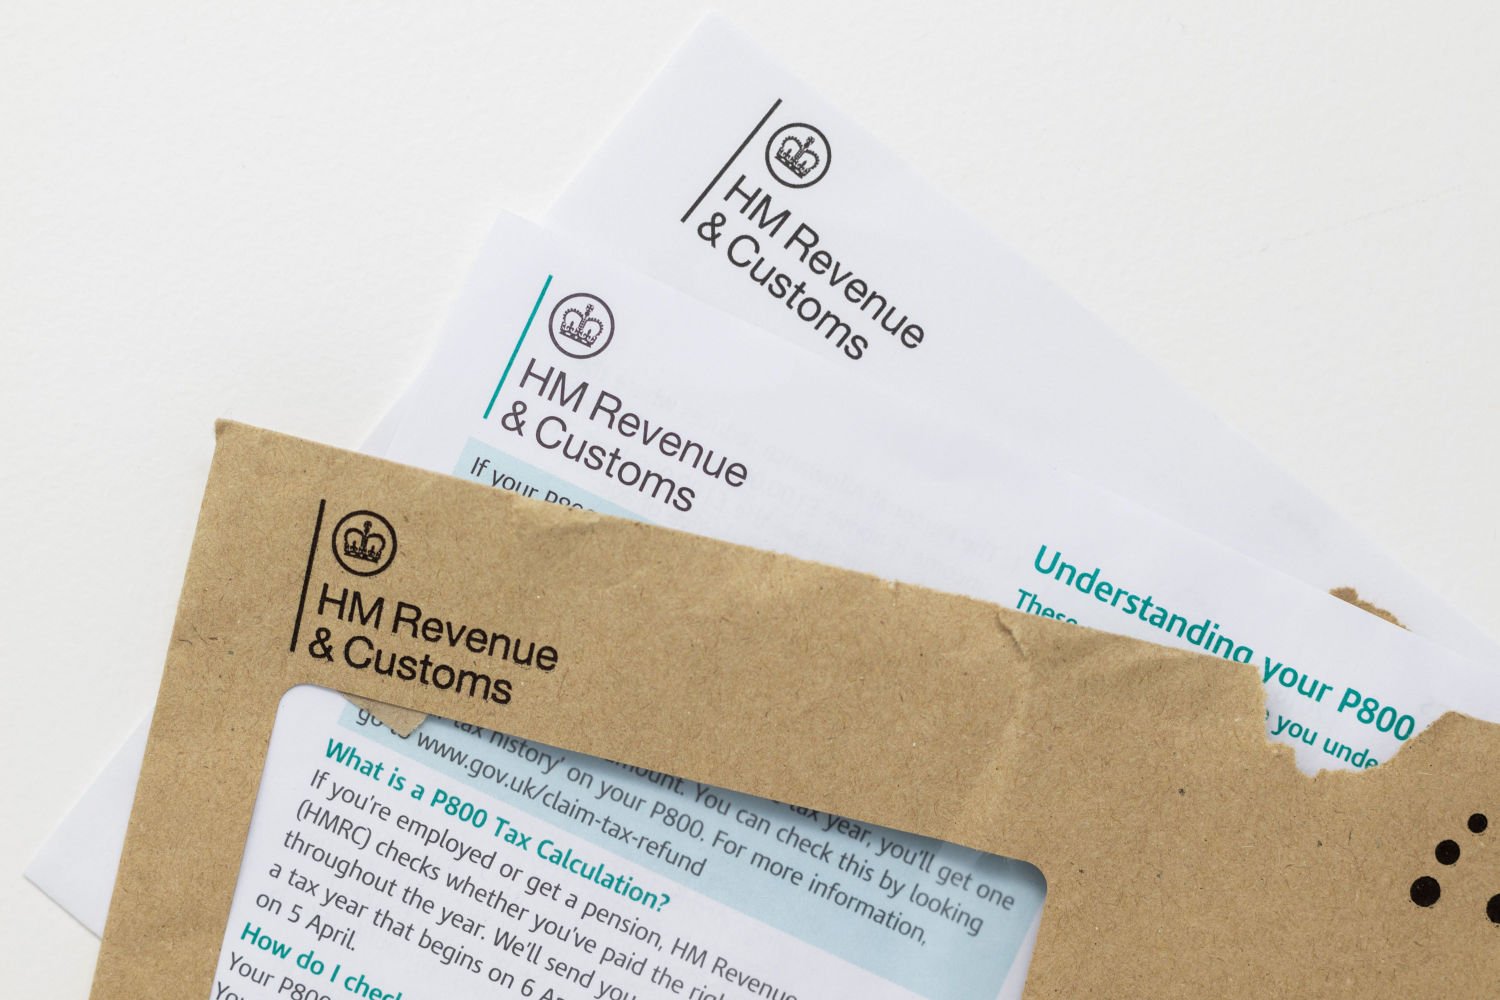 Income tax letter from HMRC